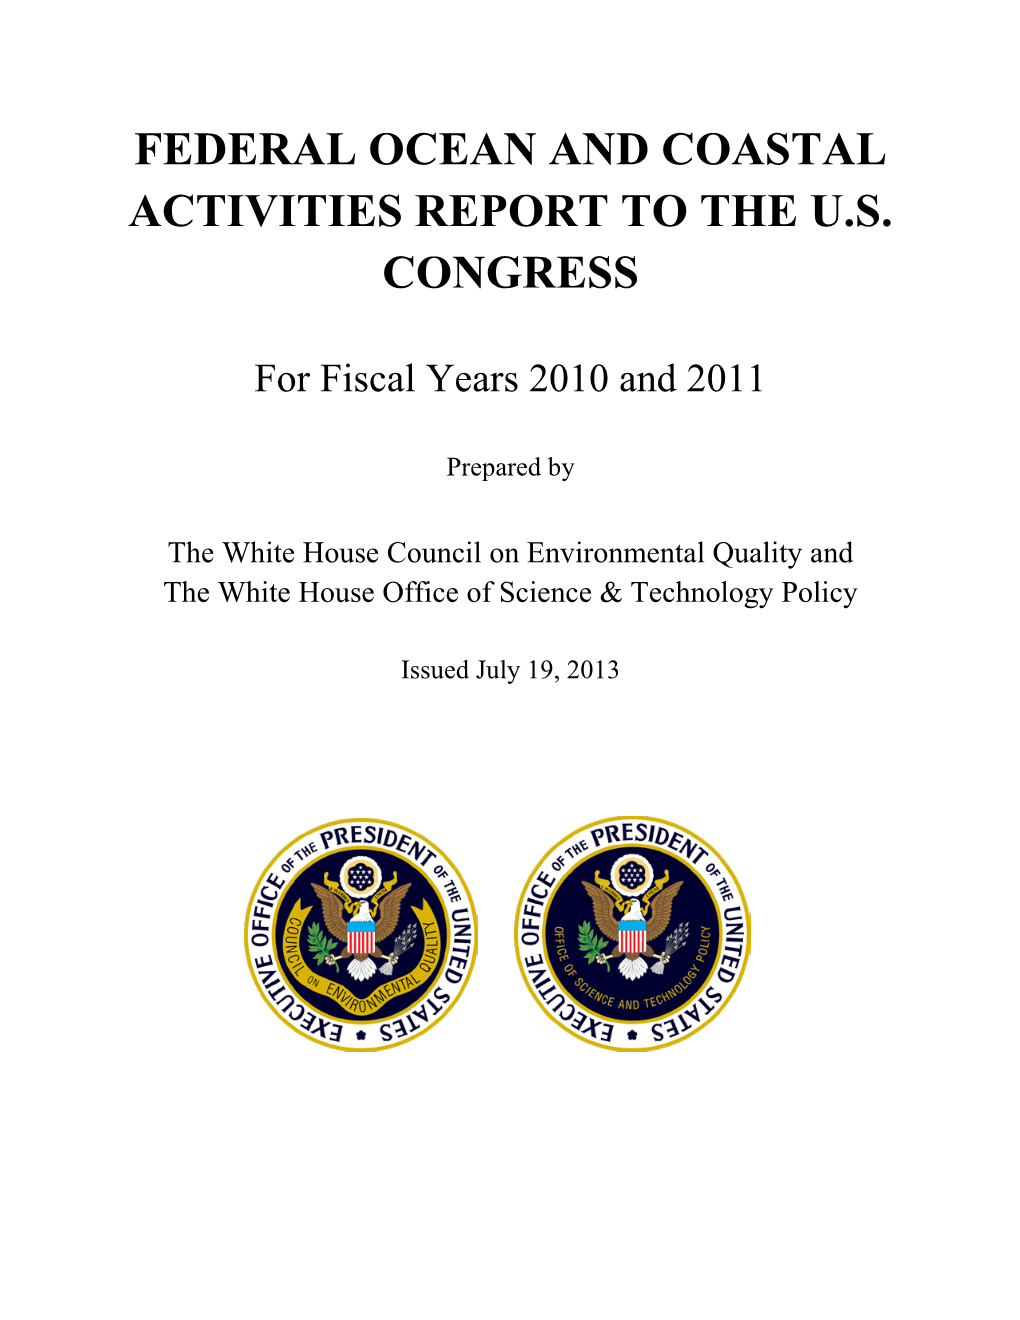 Federal Ocean and Coastal Activities Report to the US Congress